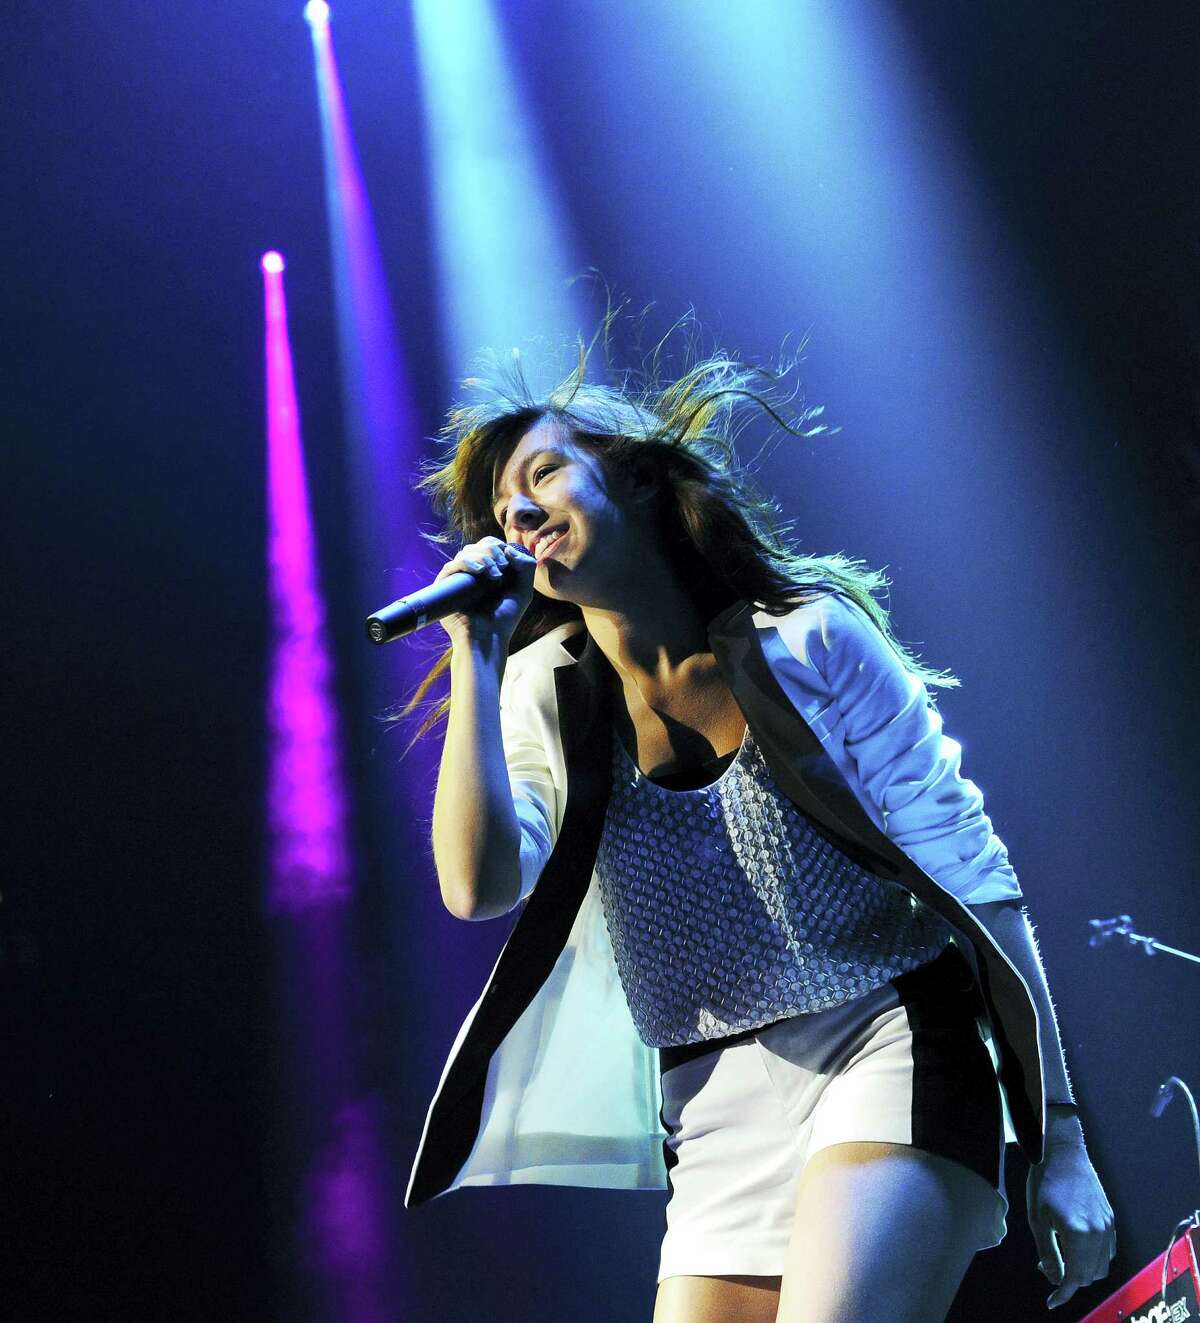 Christina Grimmie performs in concert at the Bridgestone Arena, in Nashville, Tenn. The singer, who was most widely known from her appearances on “The Voice,” was fatally shot as she signed autographs Friday, June 10, 2016, after performing in Orlando, Florida.